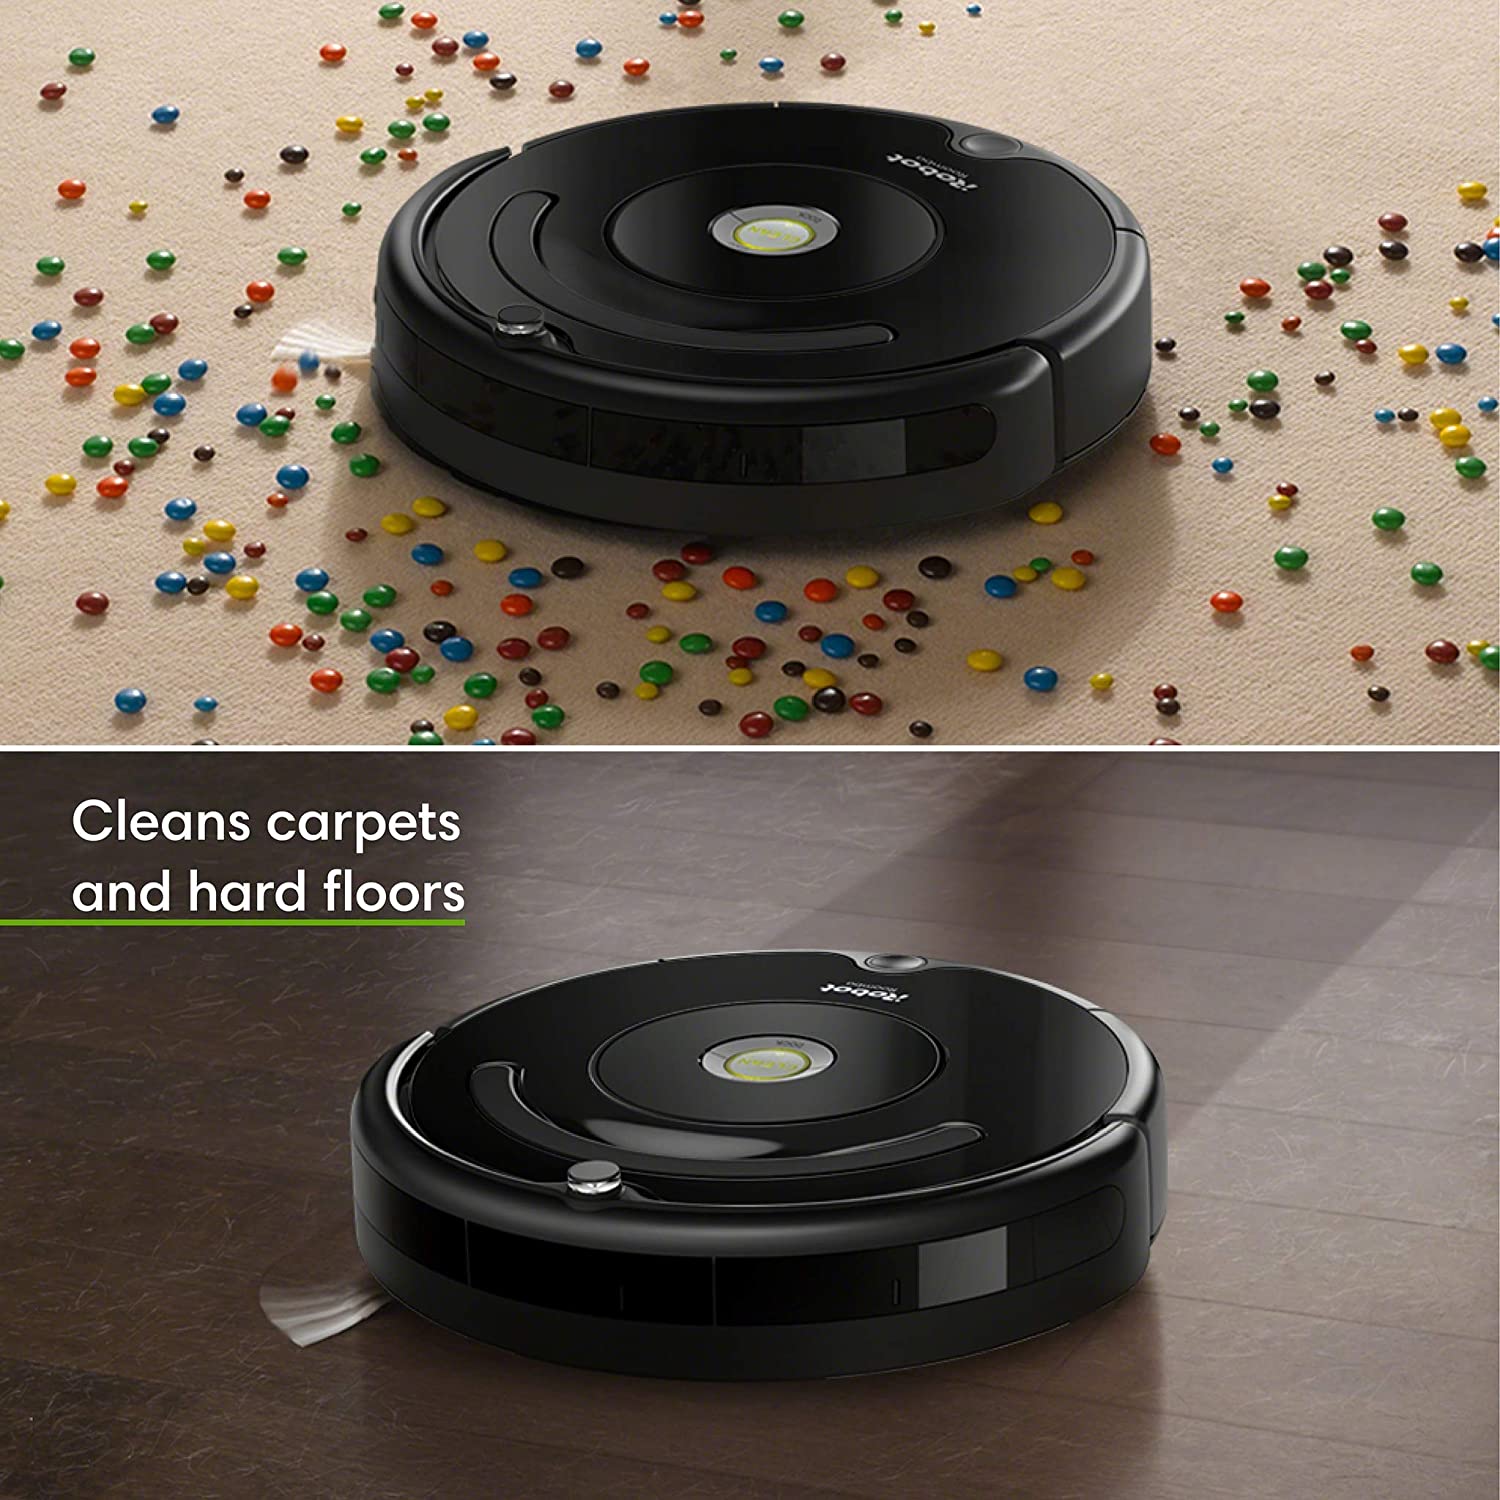 iRobot Roomba 675 Robot Vacuum-Wi-Fi Connectivity, Works with Alexa, Good for Pet Hair, Carpets, Hard Floors, Self-Charging - image 5 of 9